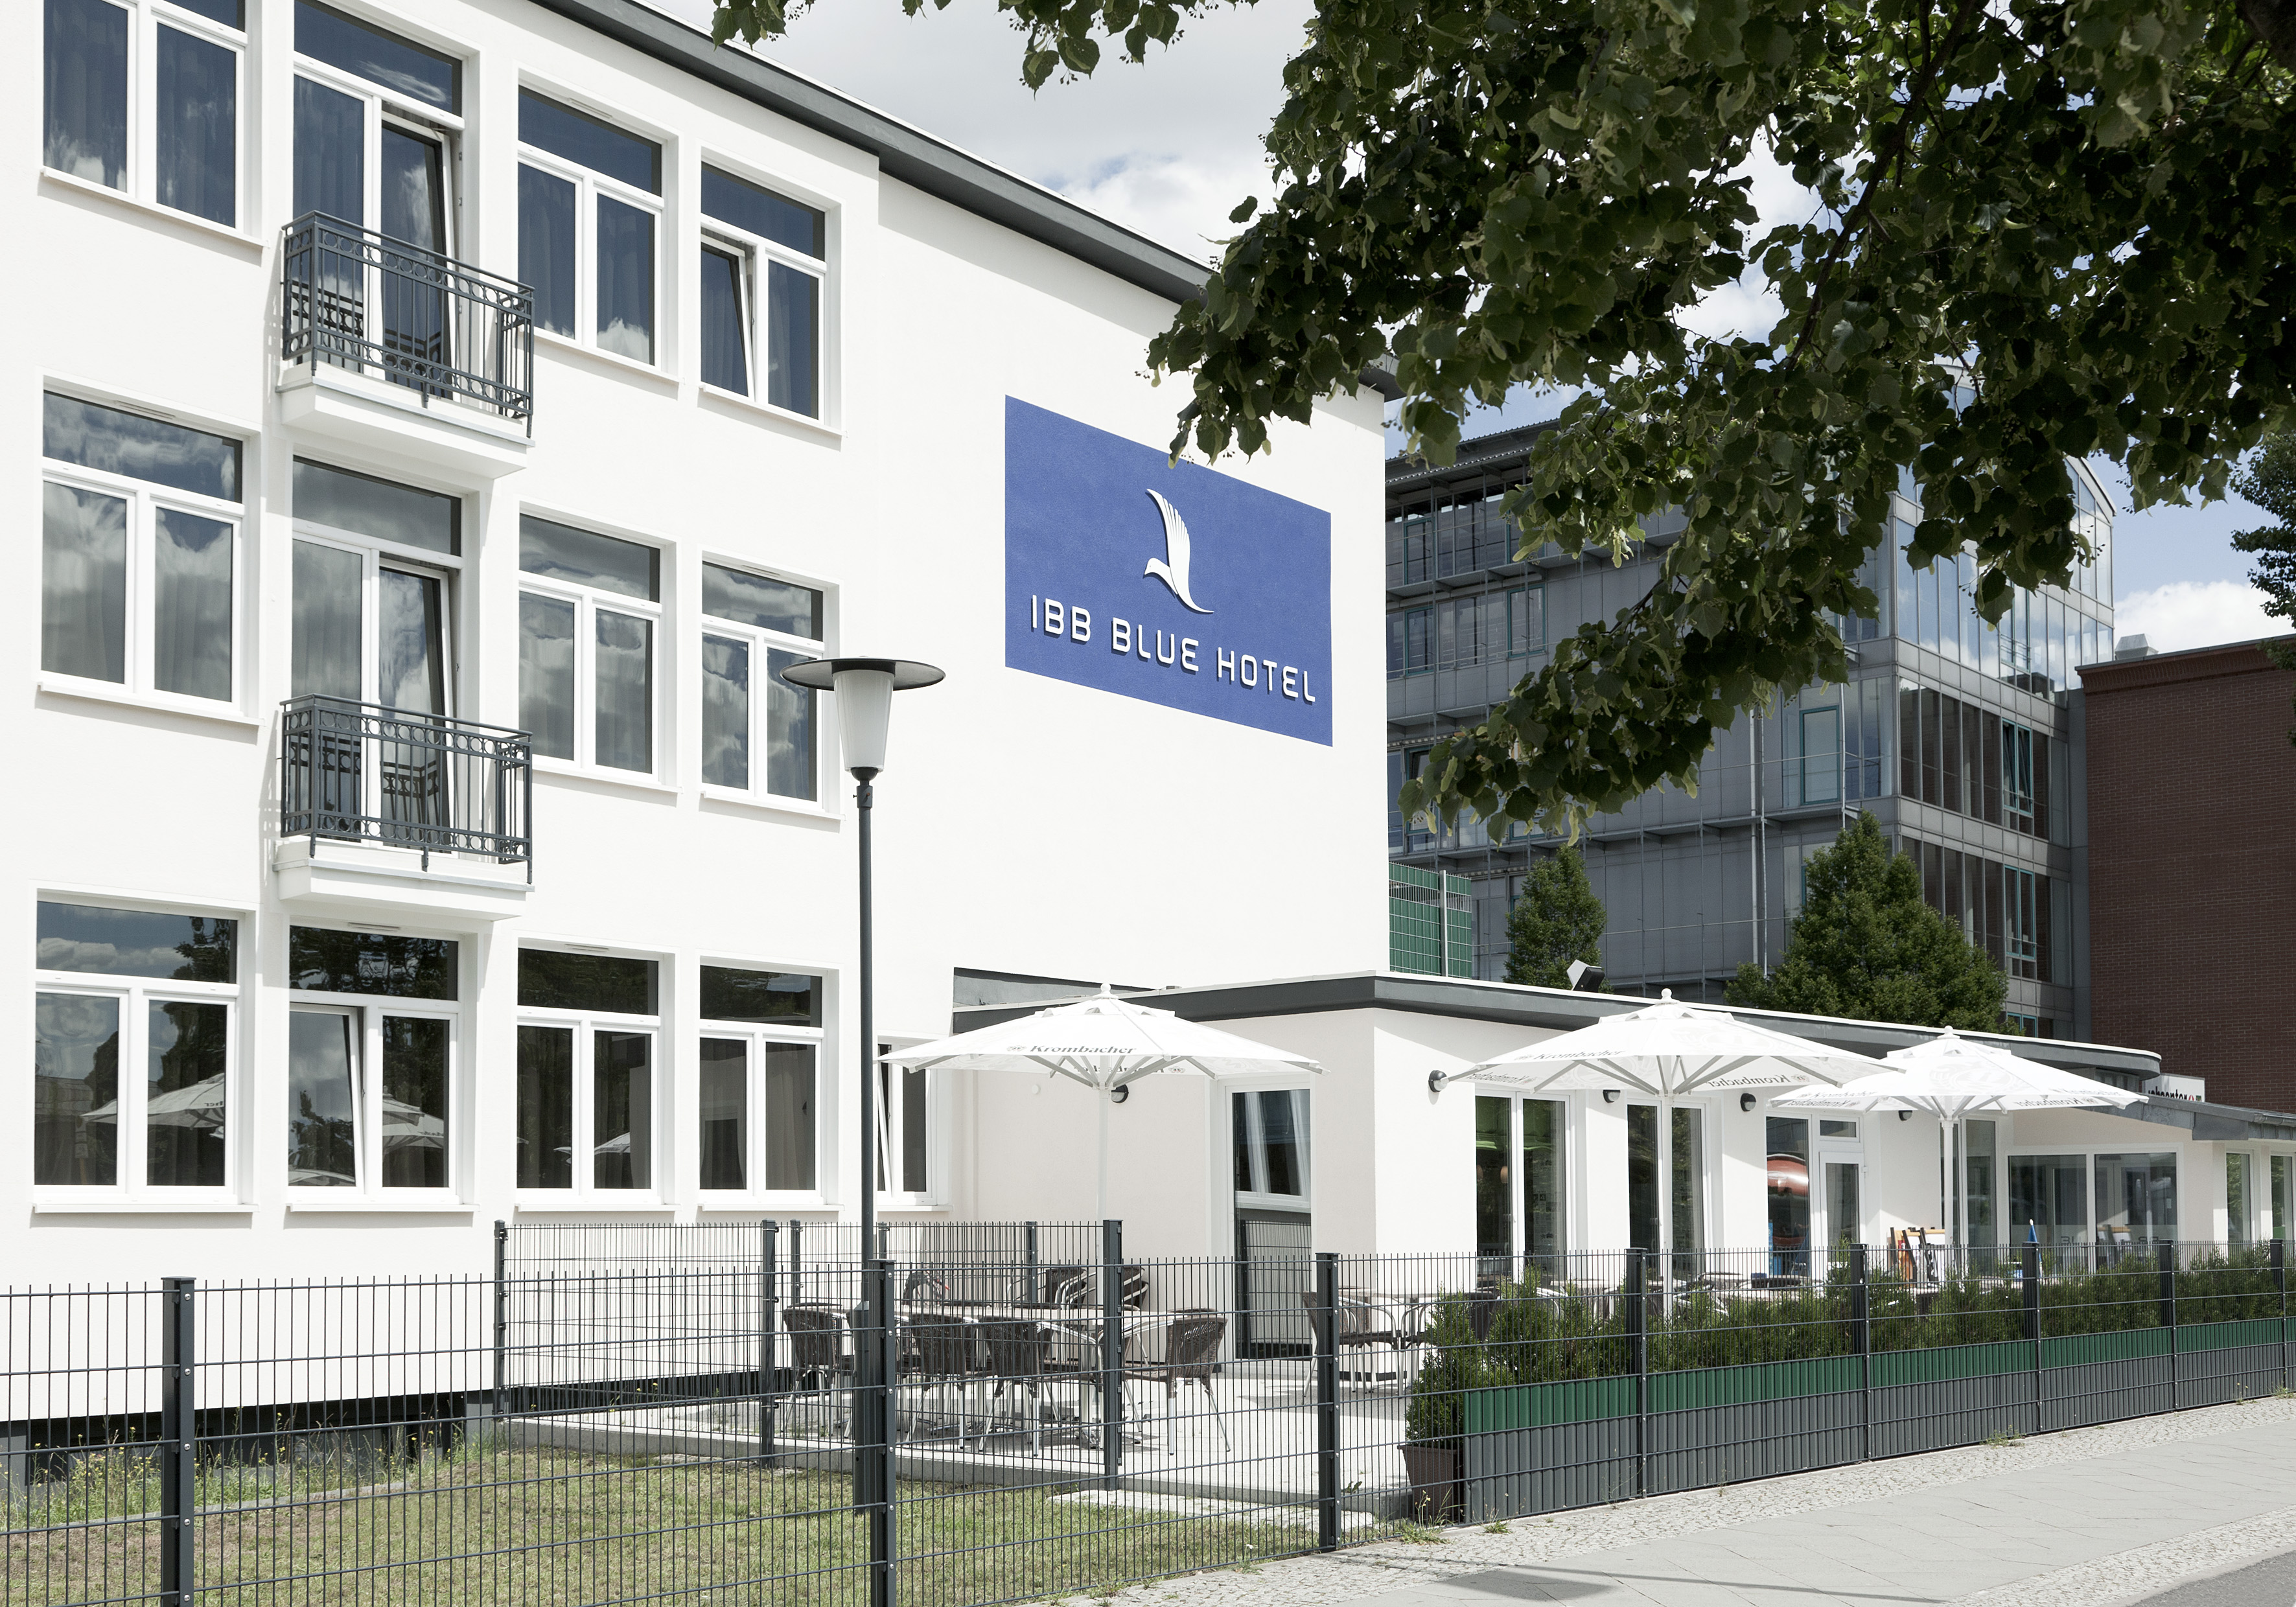 IBB Blue Hotel Berlin-Airport <br/>60.27 ew <br/> <a href='http://vakantieoplossing.nl/outpage/?id=df4a53b8a0caa400d05c7dc9237033c1' target='_blank'>View Details</a>